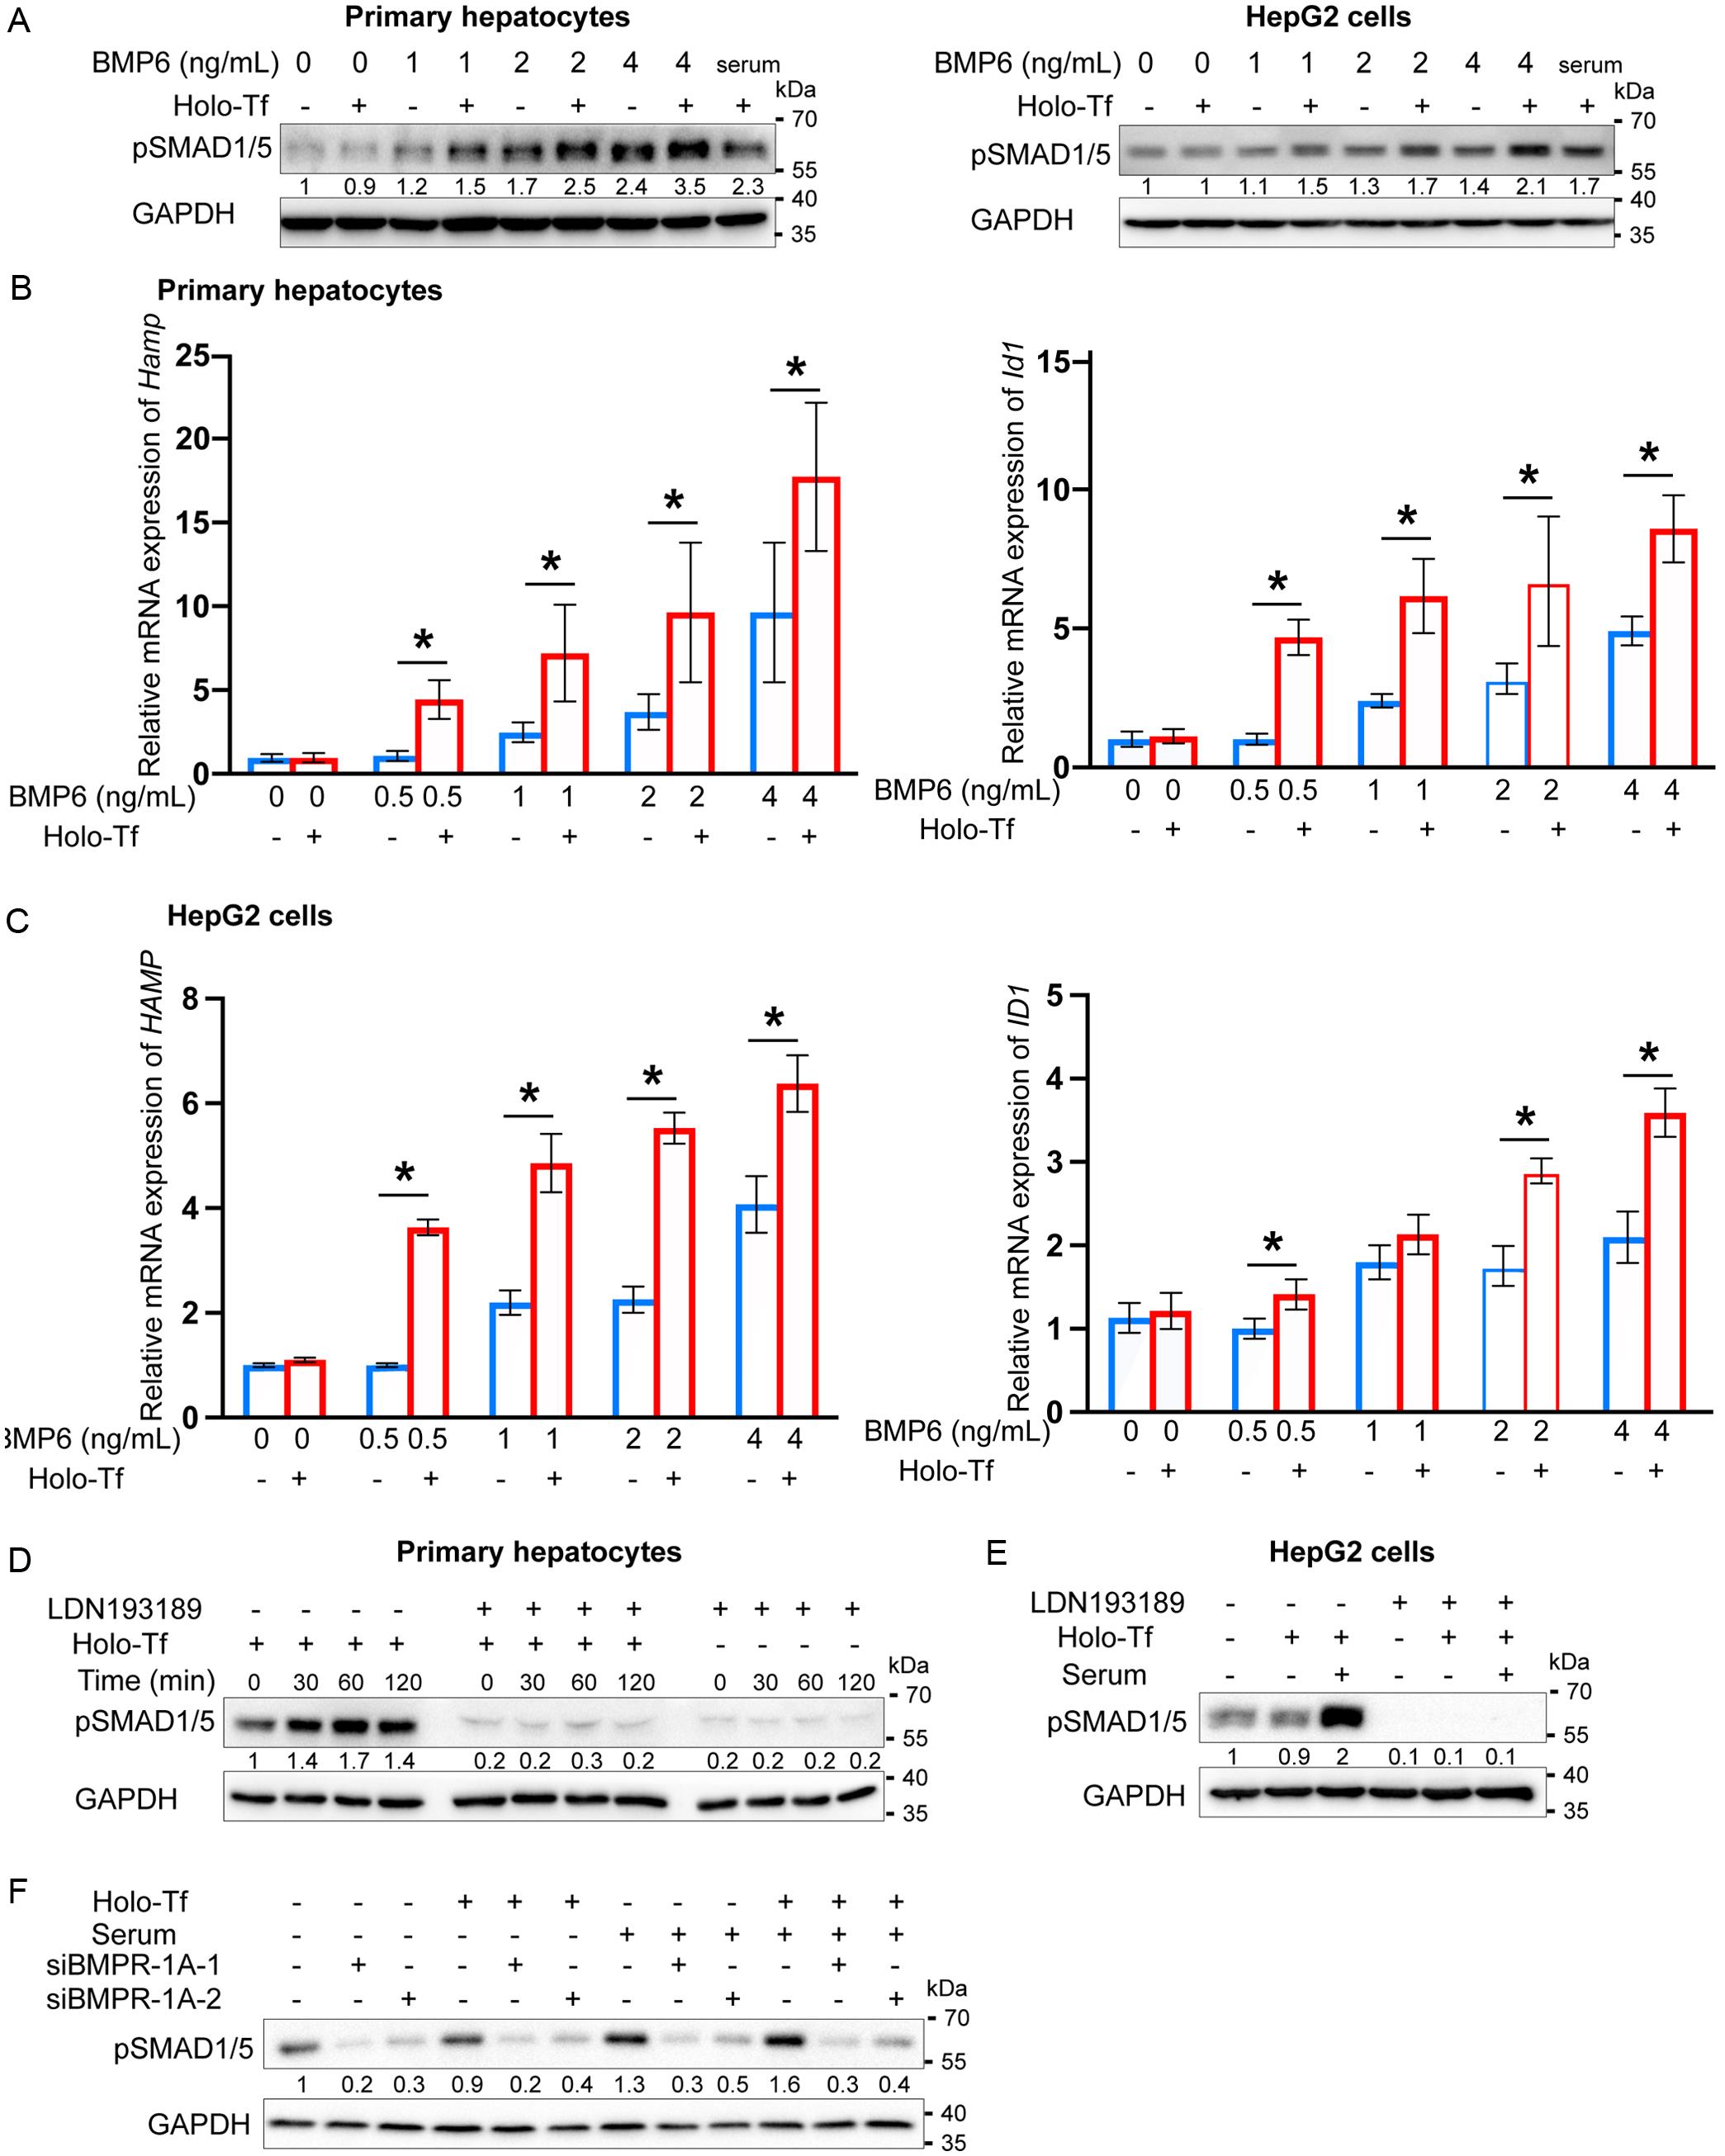 Effects of holo-transferrin (Holo-Tf) on the sensitivity and responsiveness of hepatocytes to BMP6.